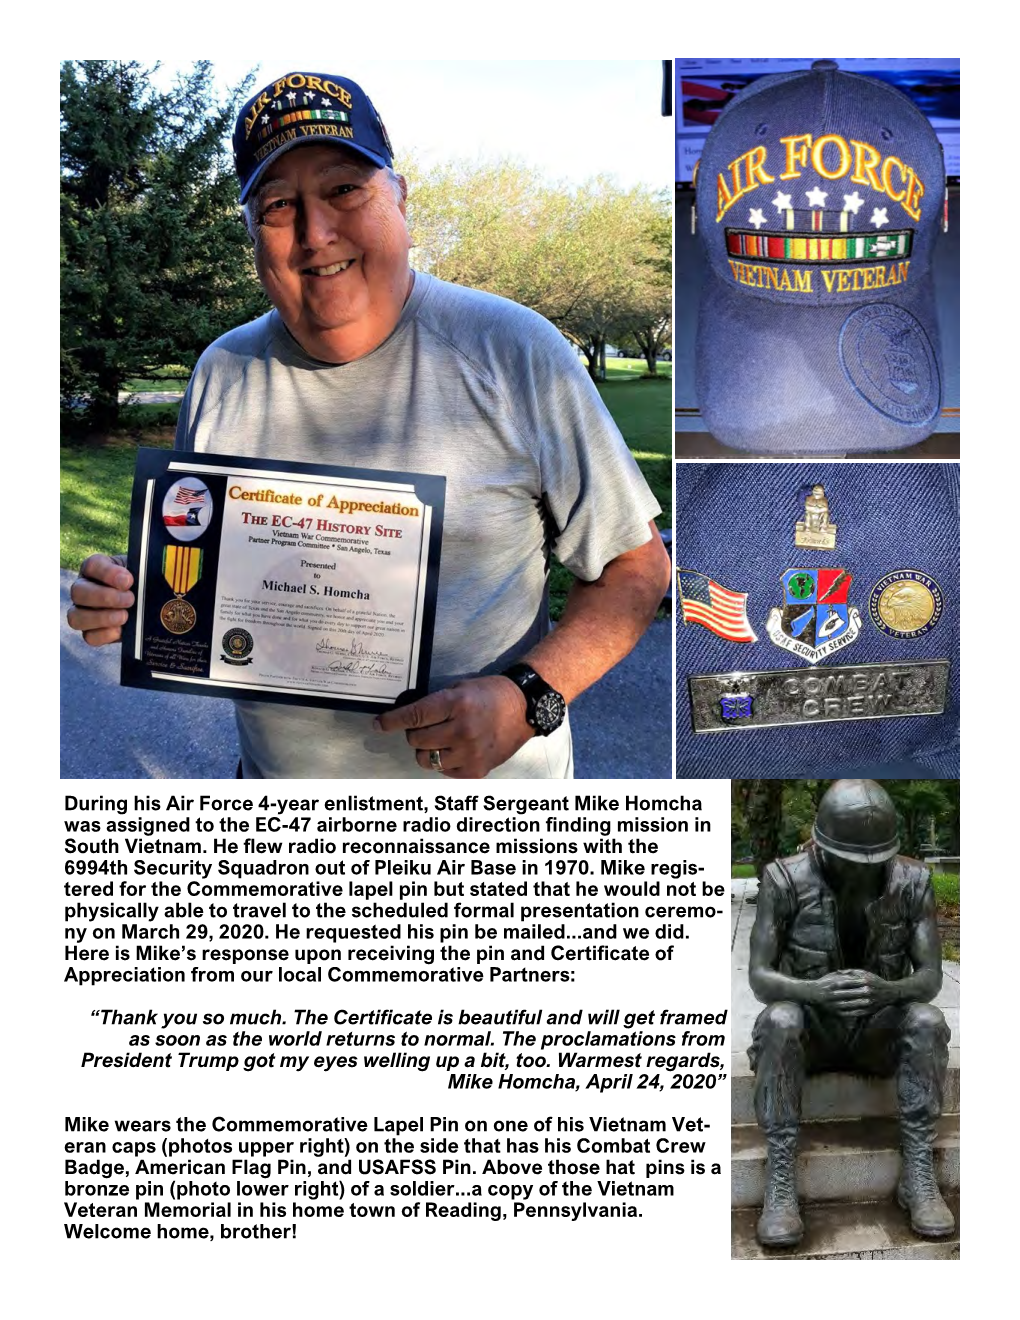 During His Air Force 4-Year Enlistment, Staff Sergeant Mike Homcha Was Assigned to the EC-47 Airborne Radio Direction Finding Mission in South Vietnam